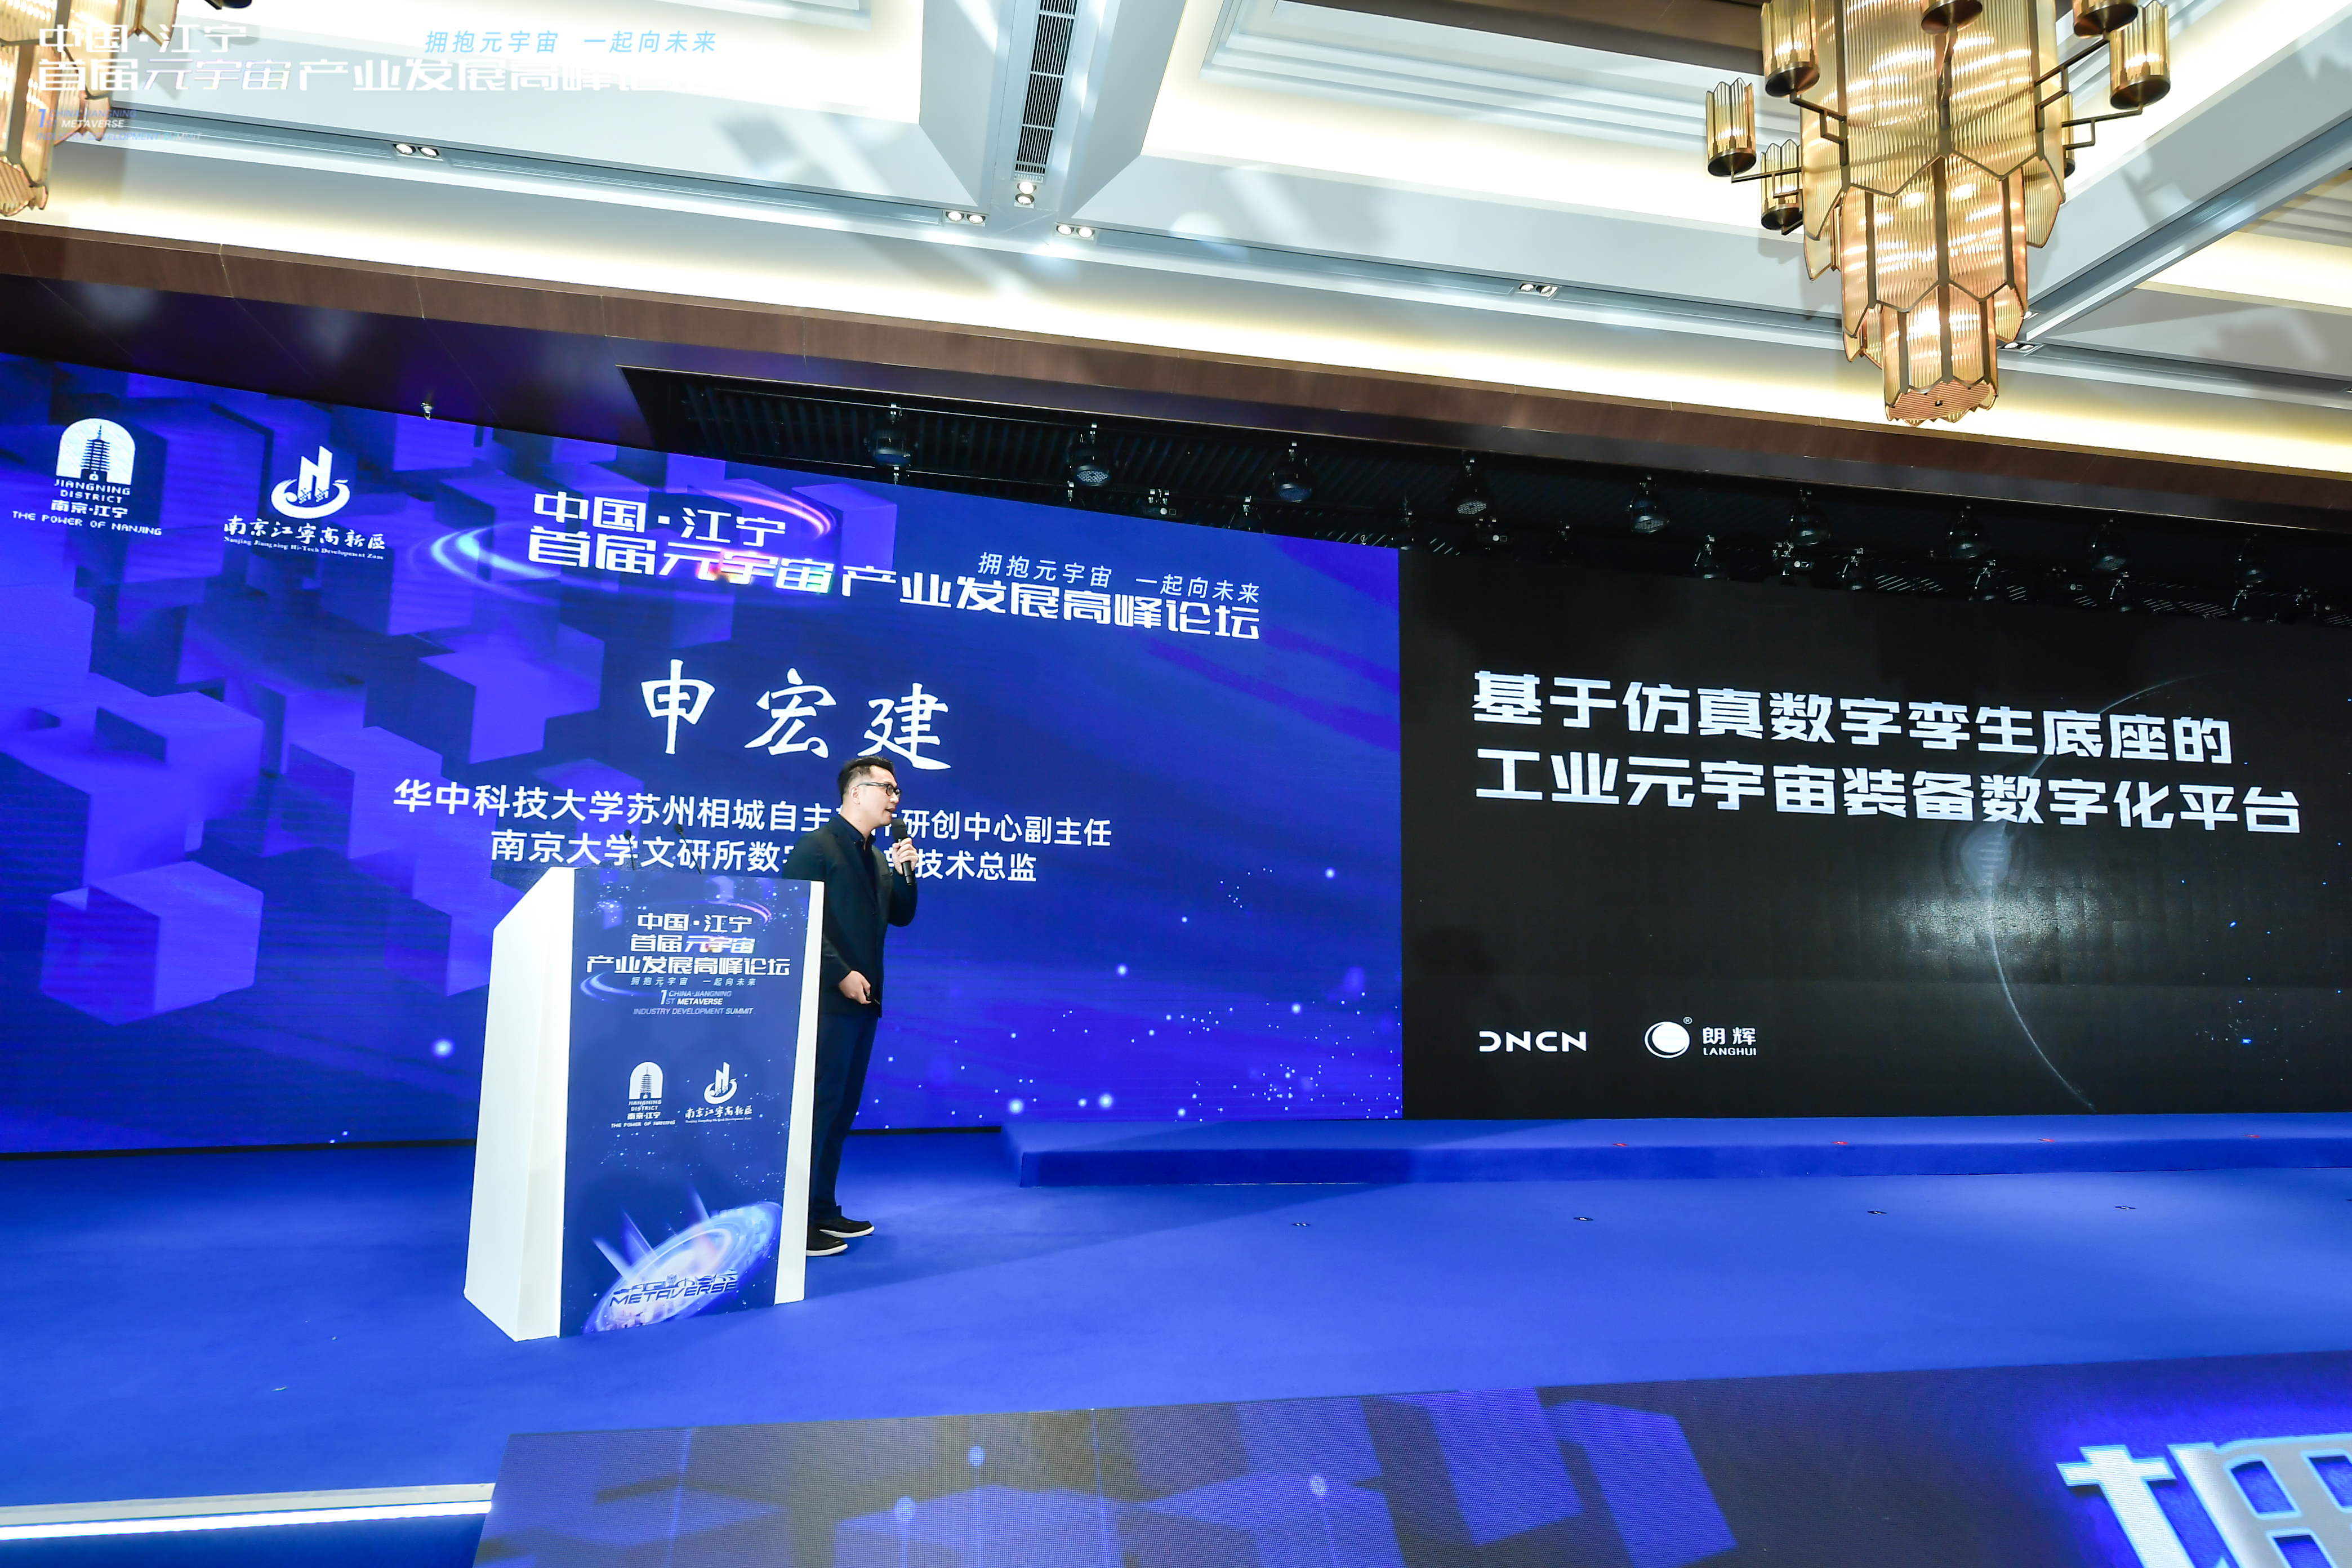 To create a new trend of industrial development, Jiangning held the first Metaverse Industry Development Summit Forum